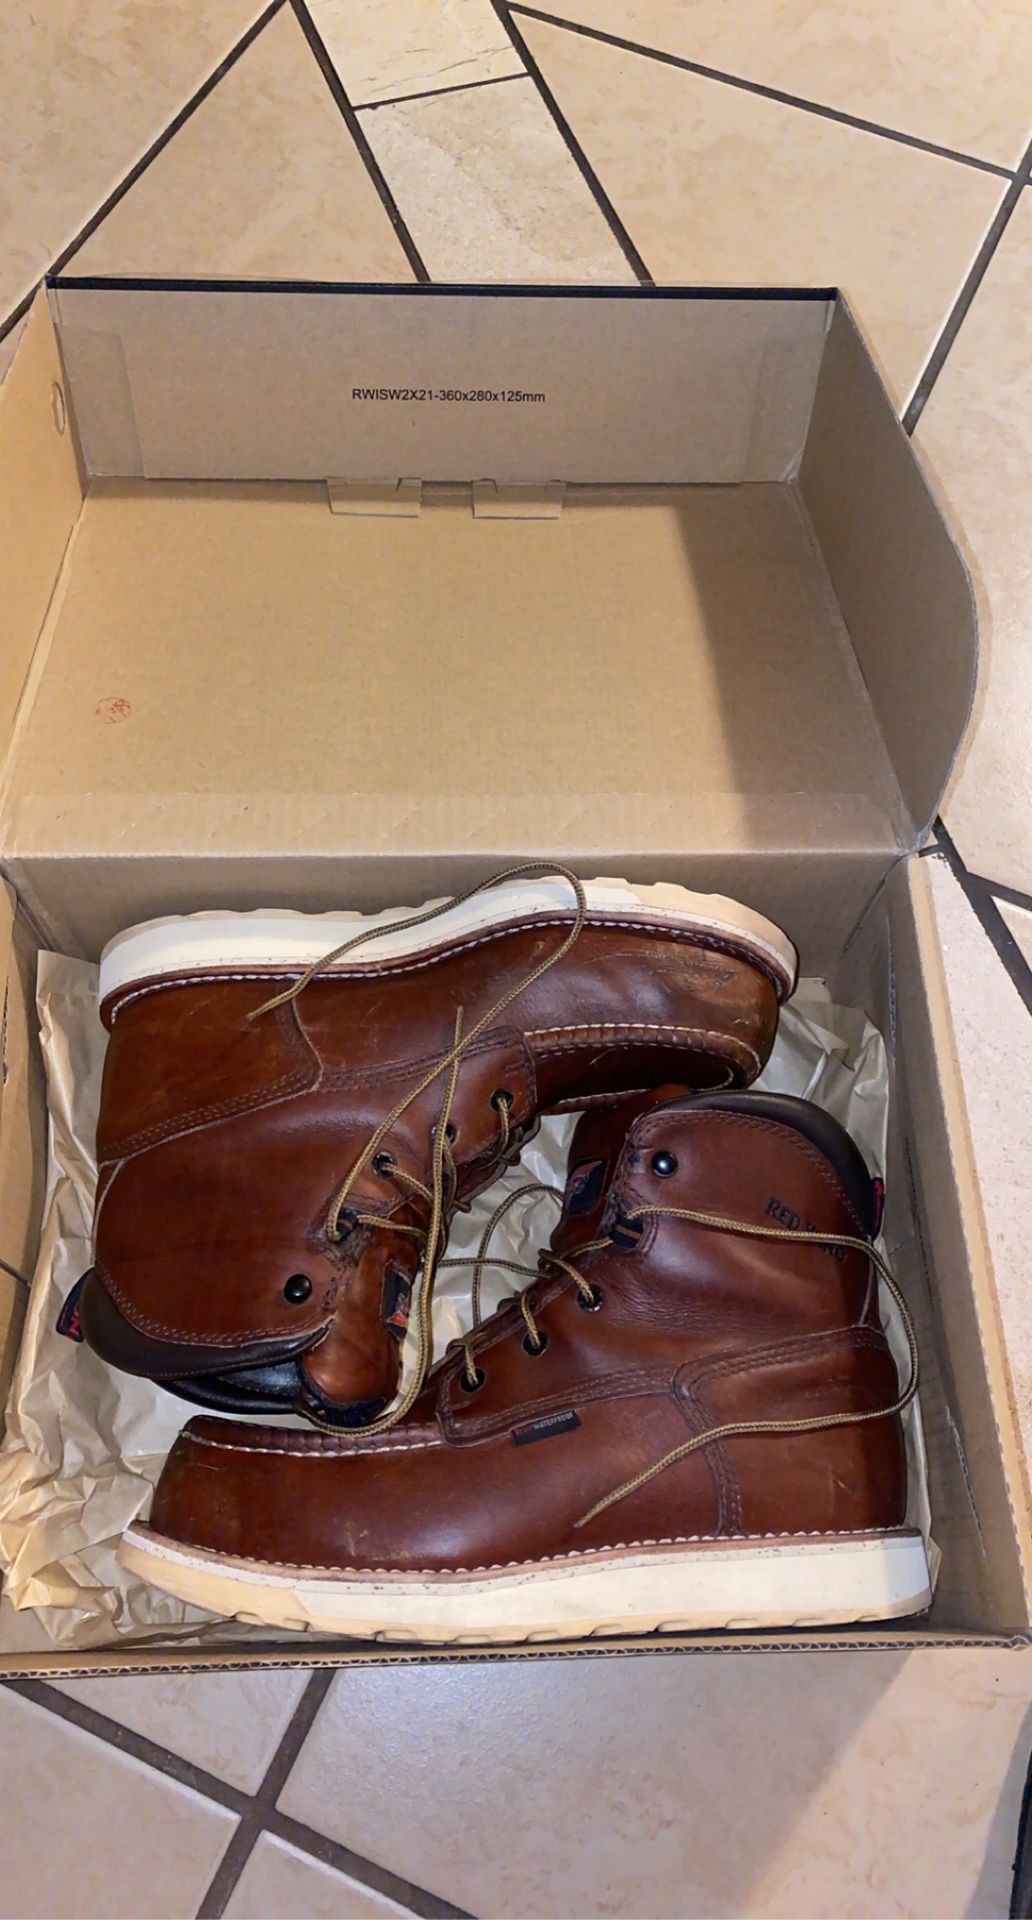 Red Wing Boots Size 8